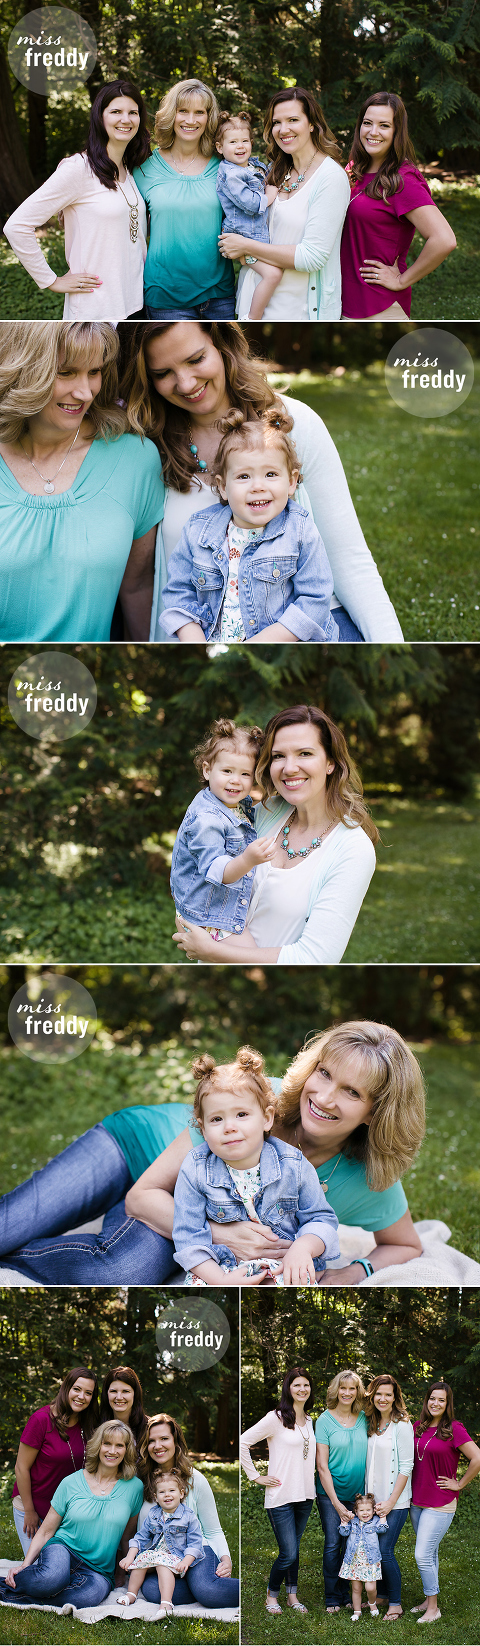 A cute extended family photos by Miss Freddy, a family photographer in Denver.